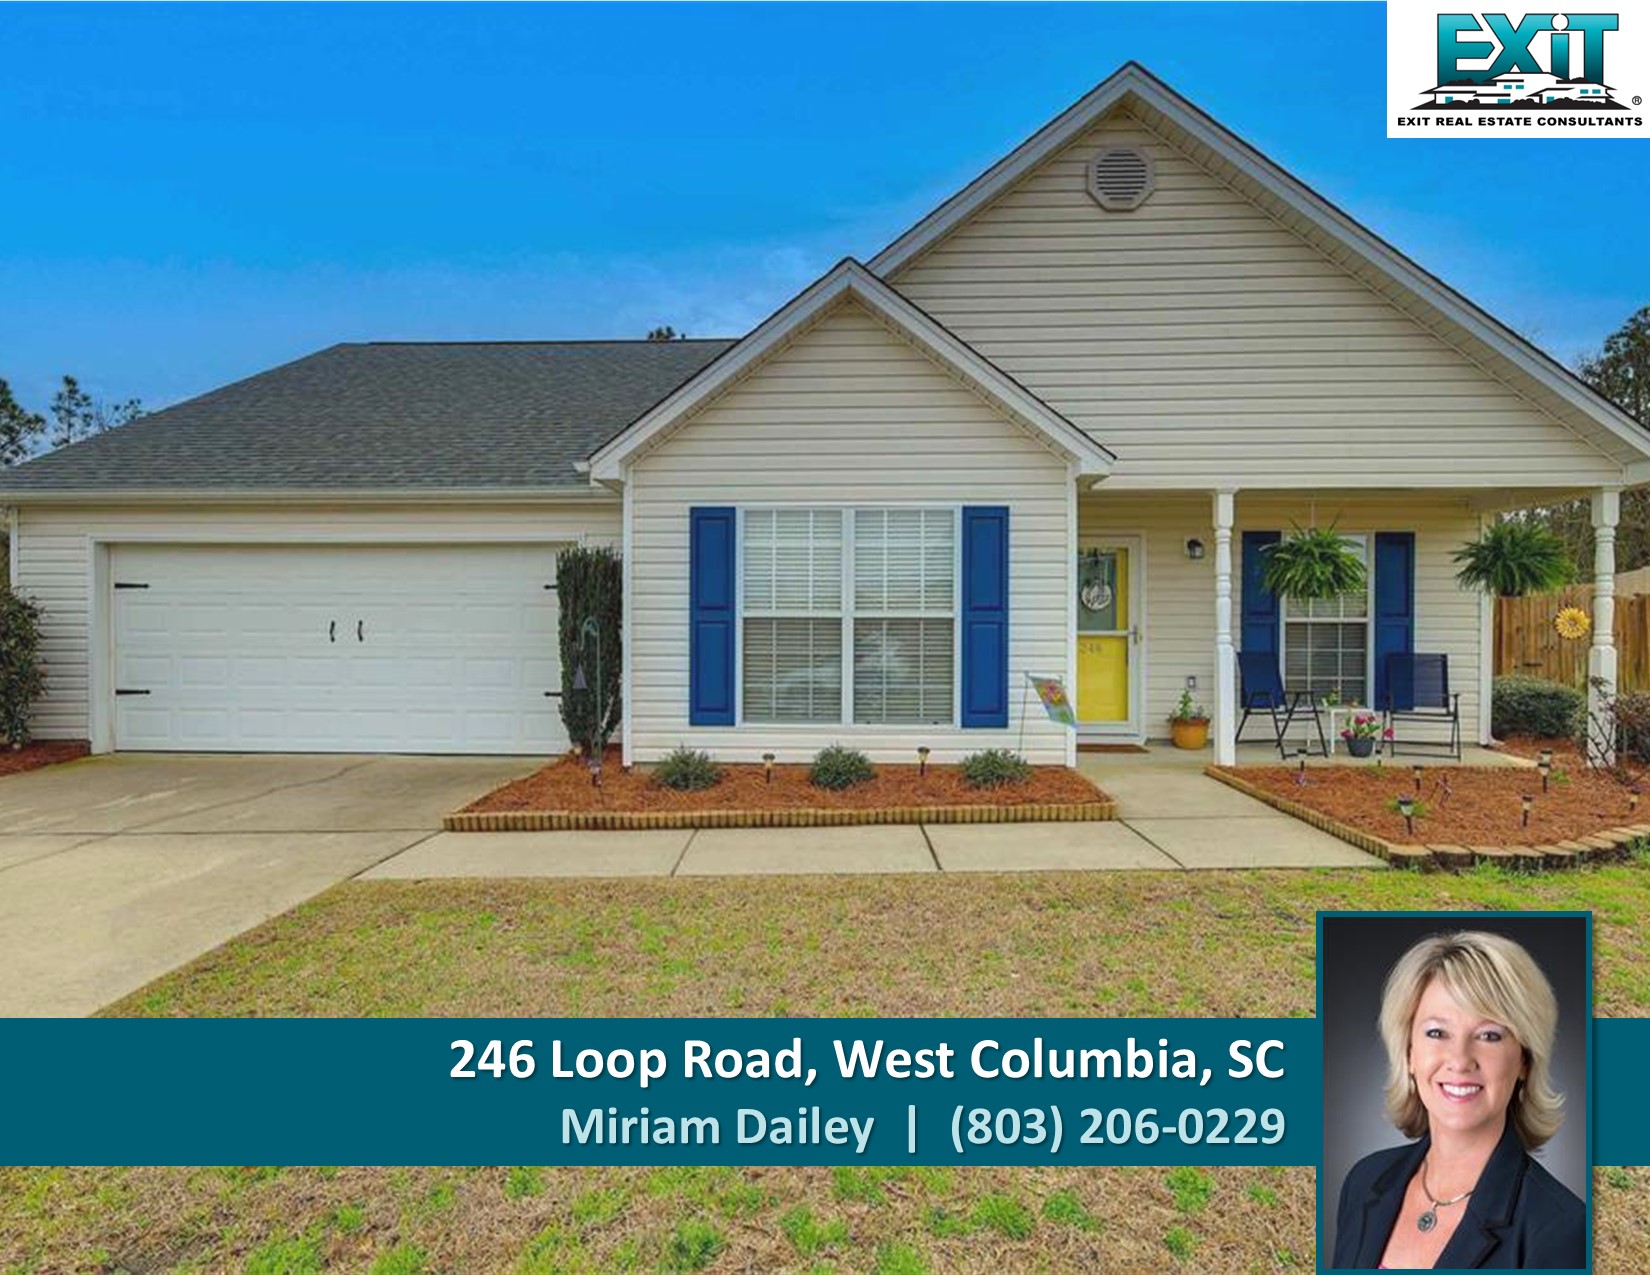 Just listed in Congaree Downs - West Columbia